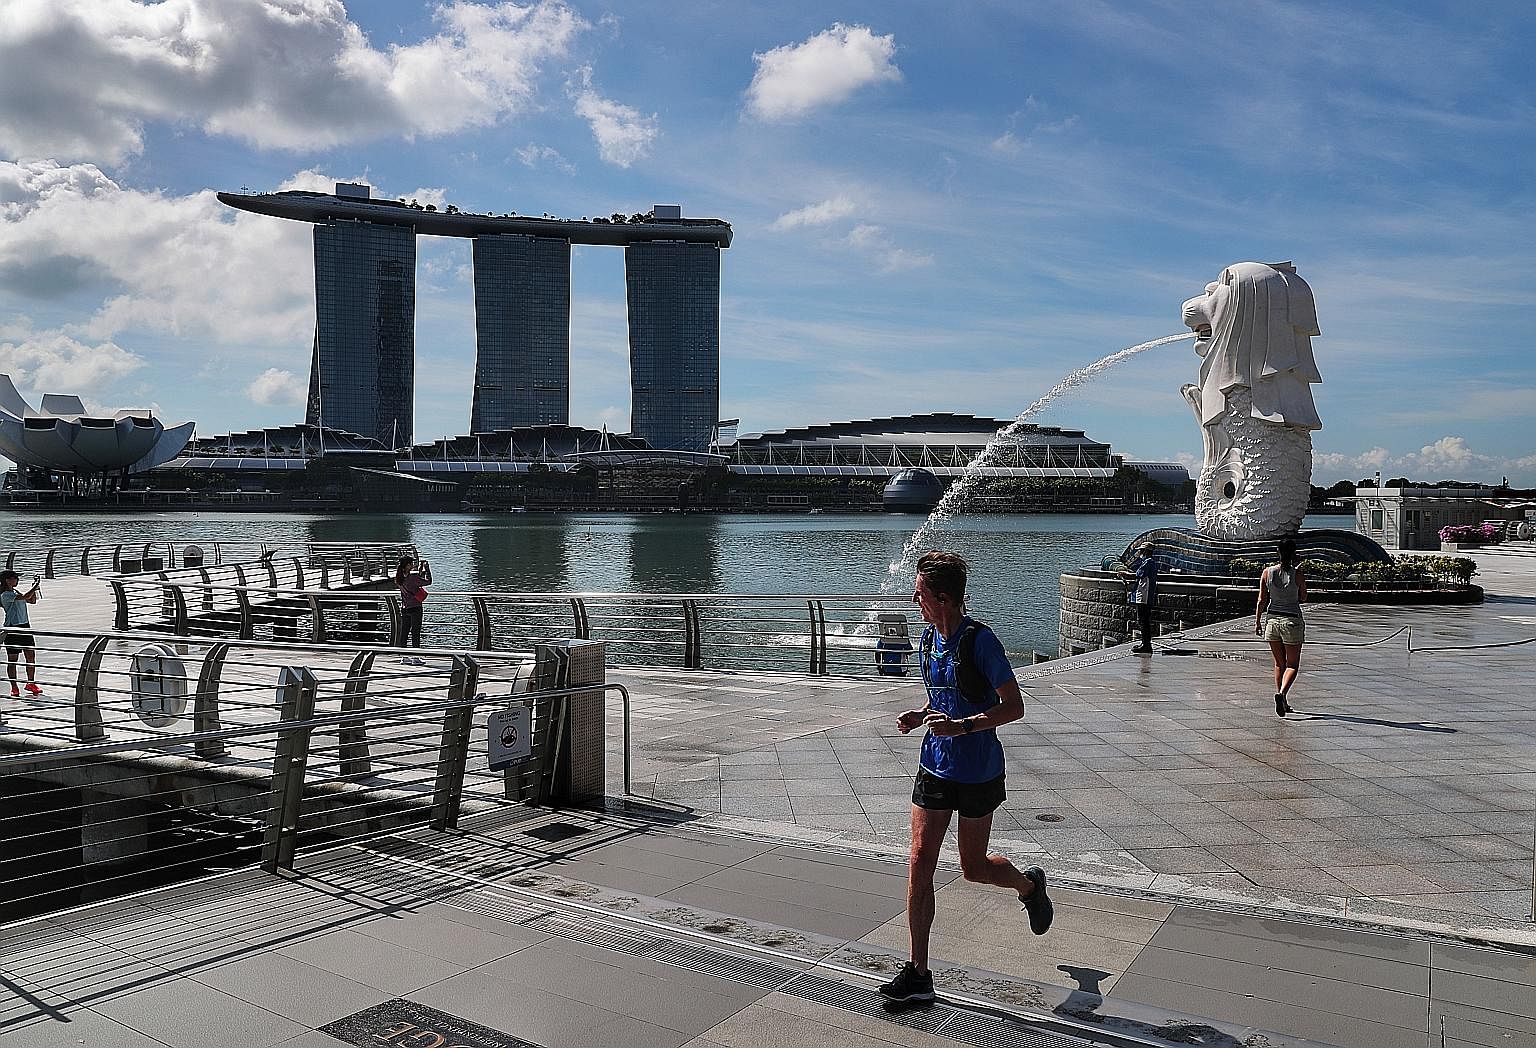 An almost empty Merlion Park yesterday. While necessary to contain the spread of the coronavirus, Singapore's circuit breaker measures through this month alone will impede economic growth in the second quarter and pull the economy into a deeper reces